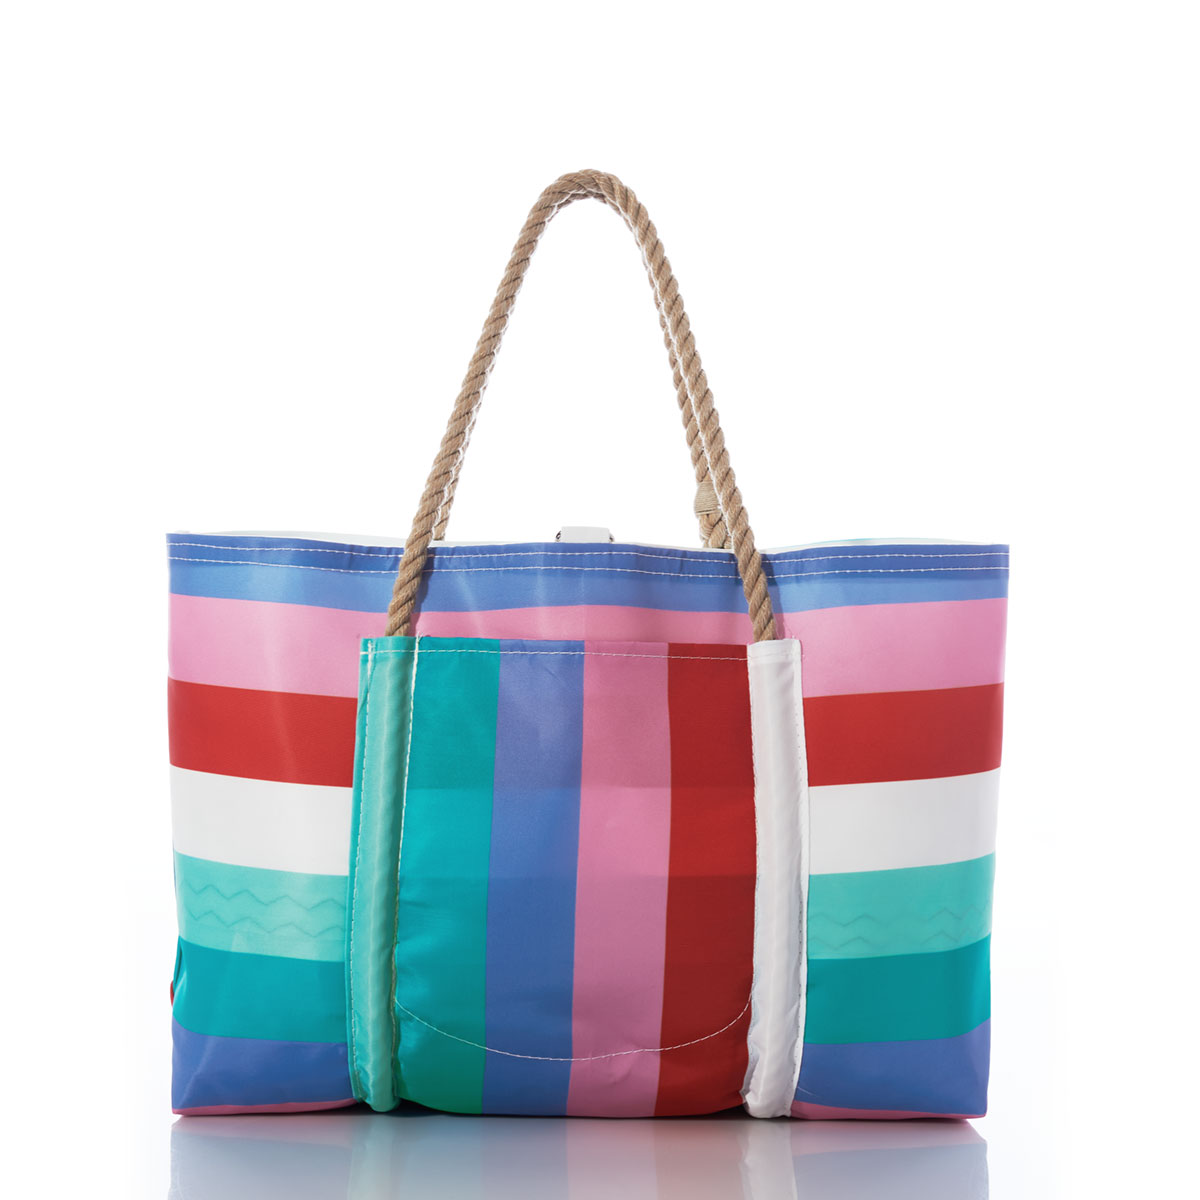 a recycled sail cloth pier tote with hemp rope handles and clasp closure is printed with bold stripes in shades of pinks and teals